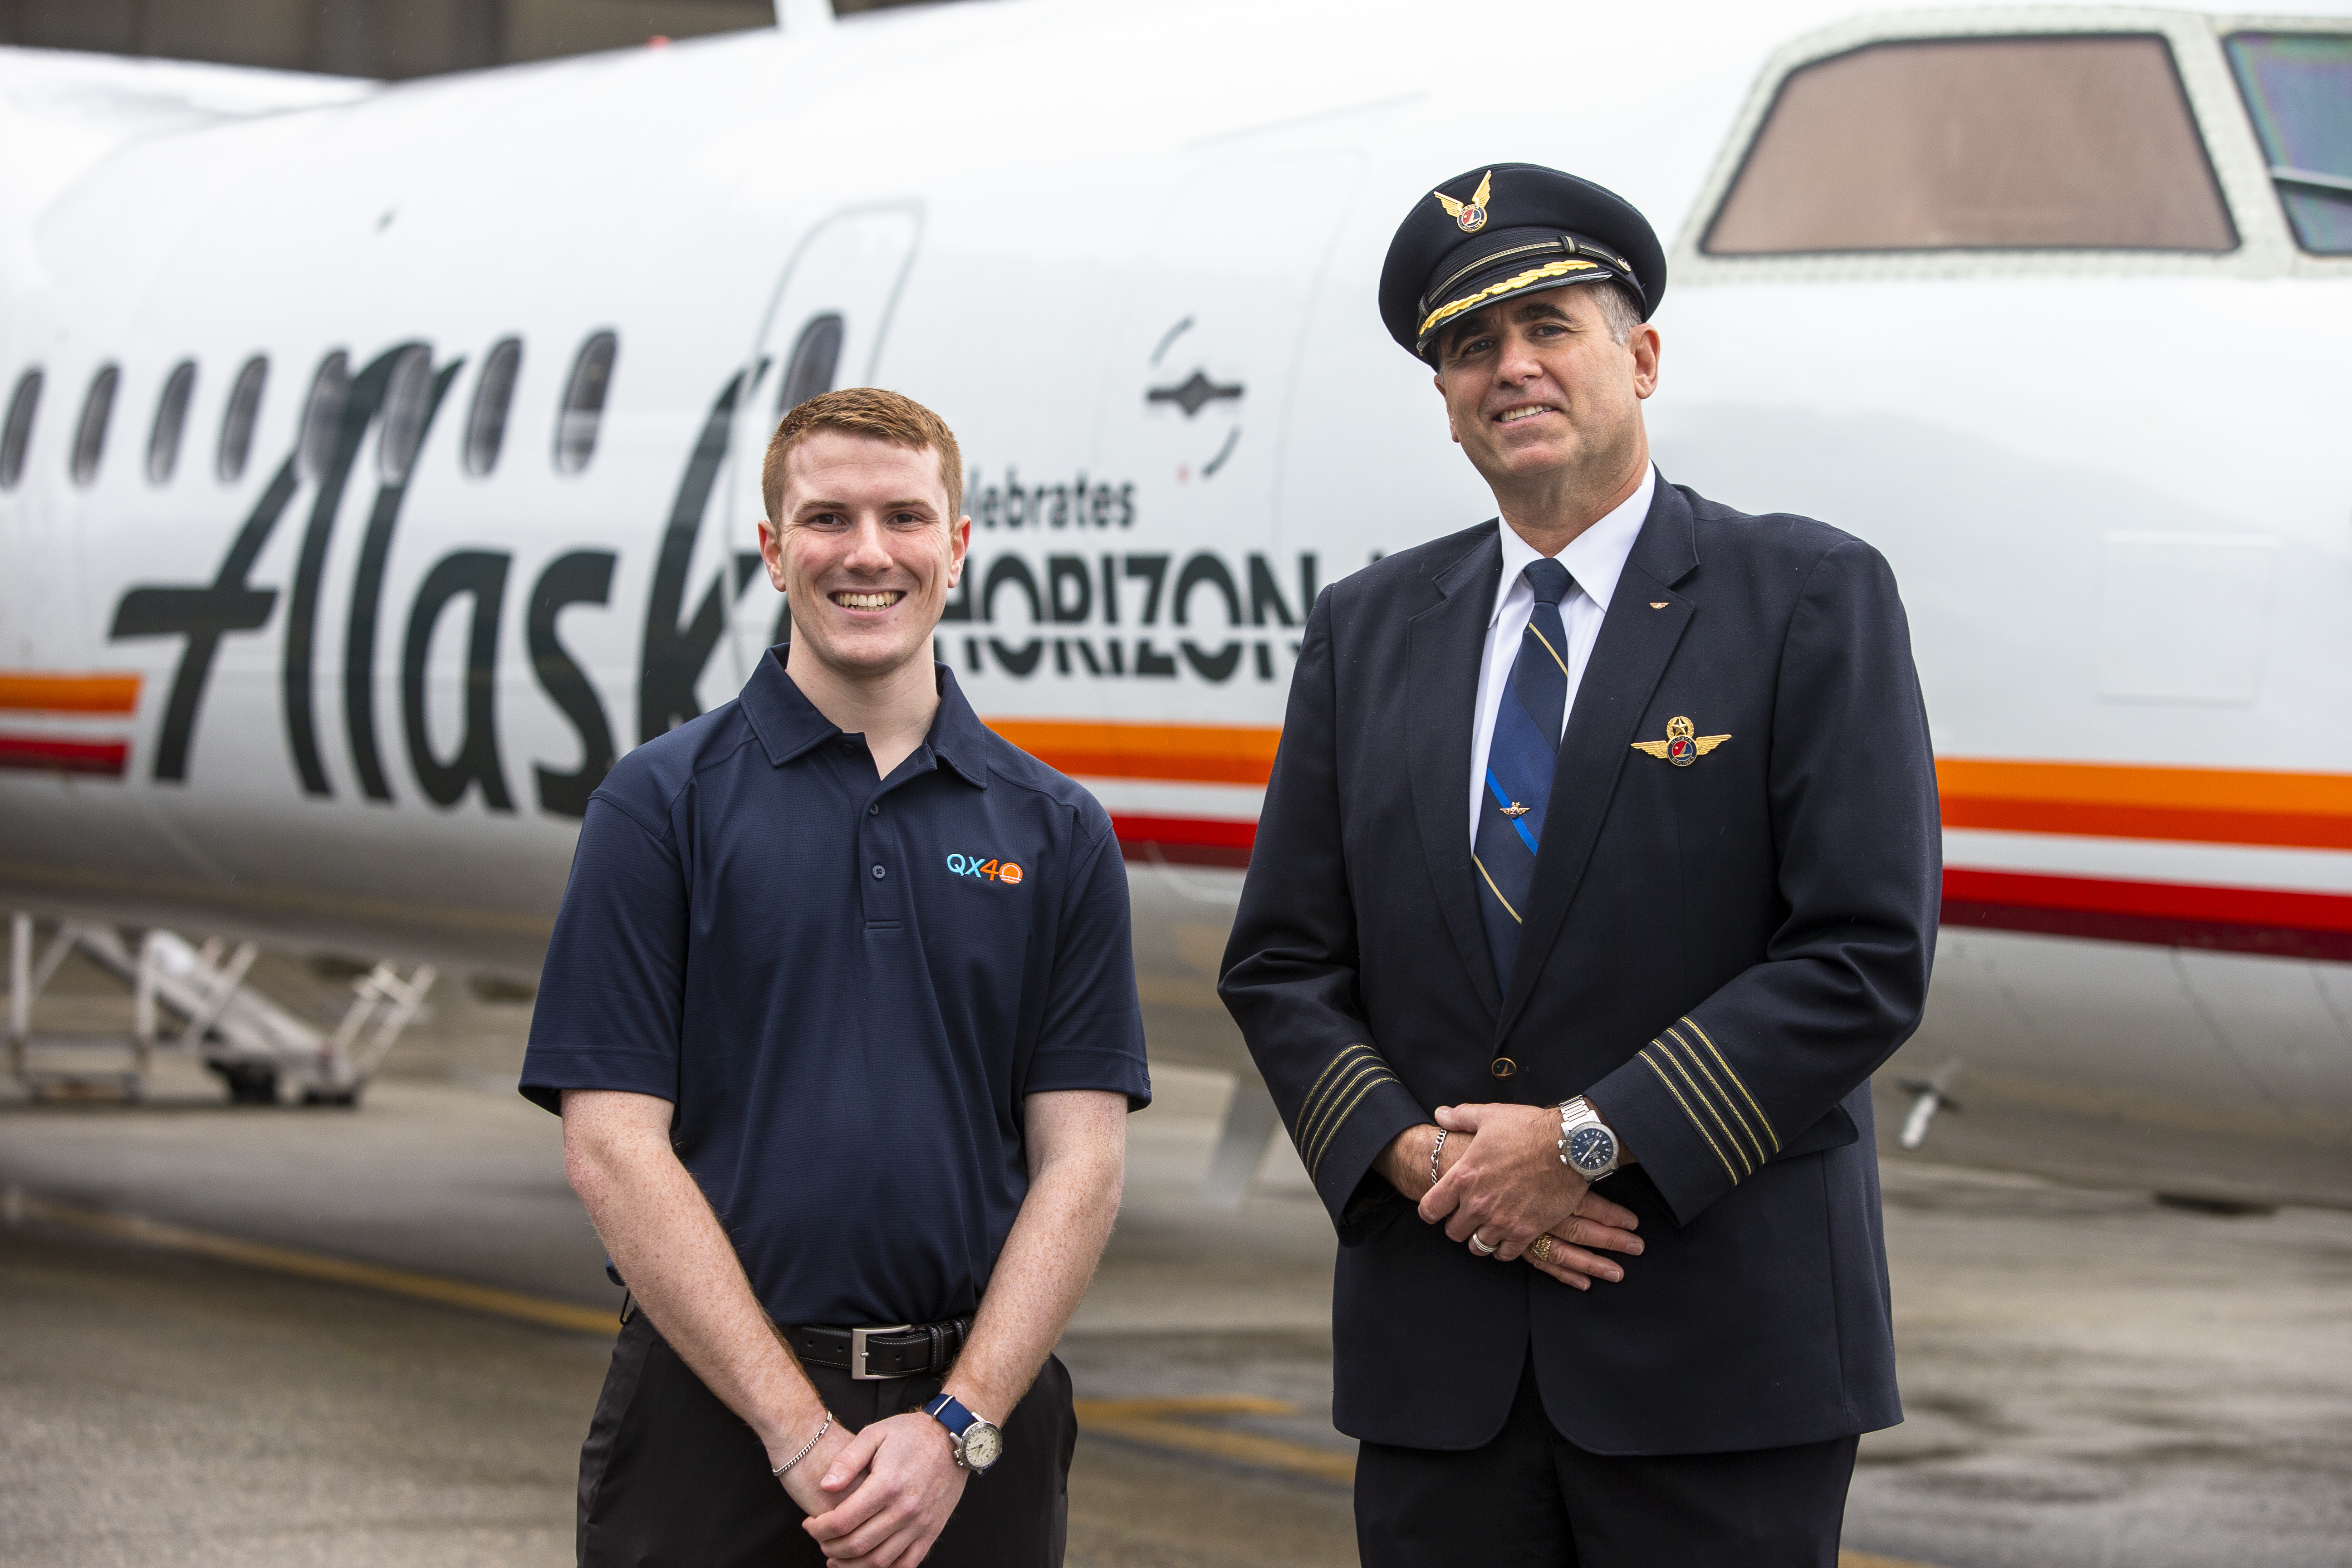 Is Pilot A Good Career? 8 Benefits of a Commercial Pilot Career